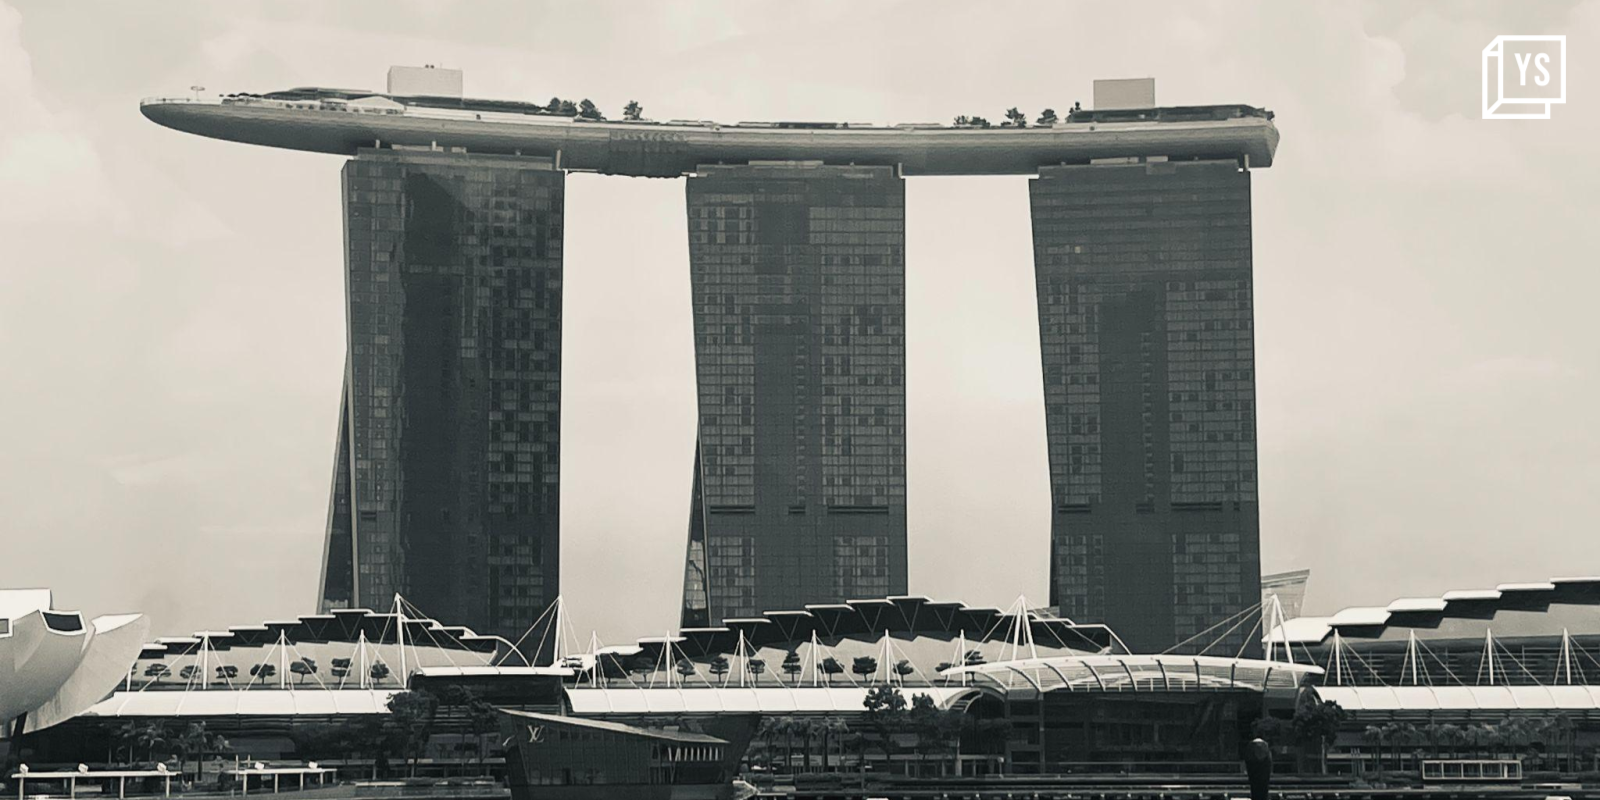 Singapore’s approach to sustainability is a noteworthy example for the rest of the world